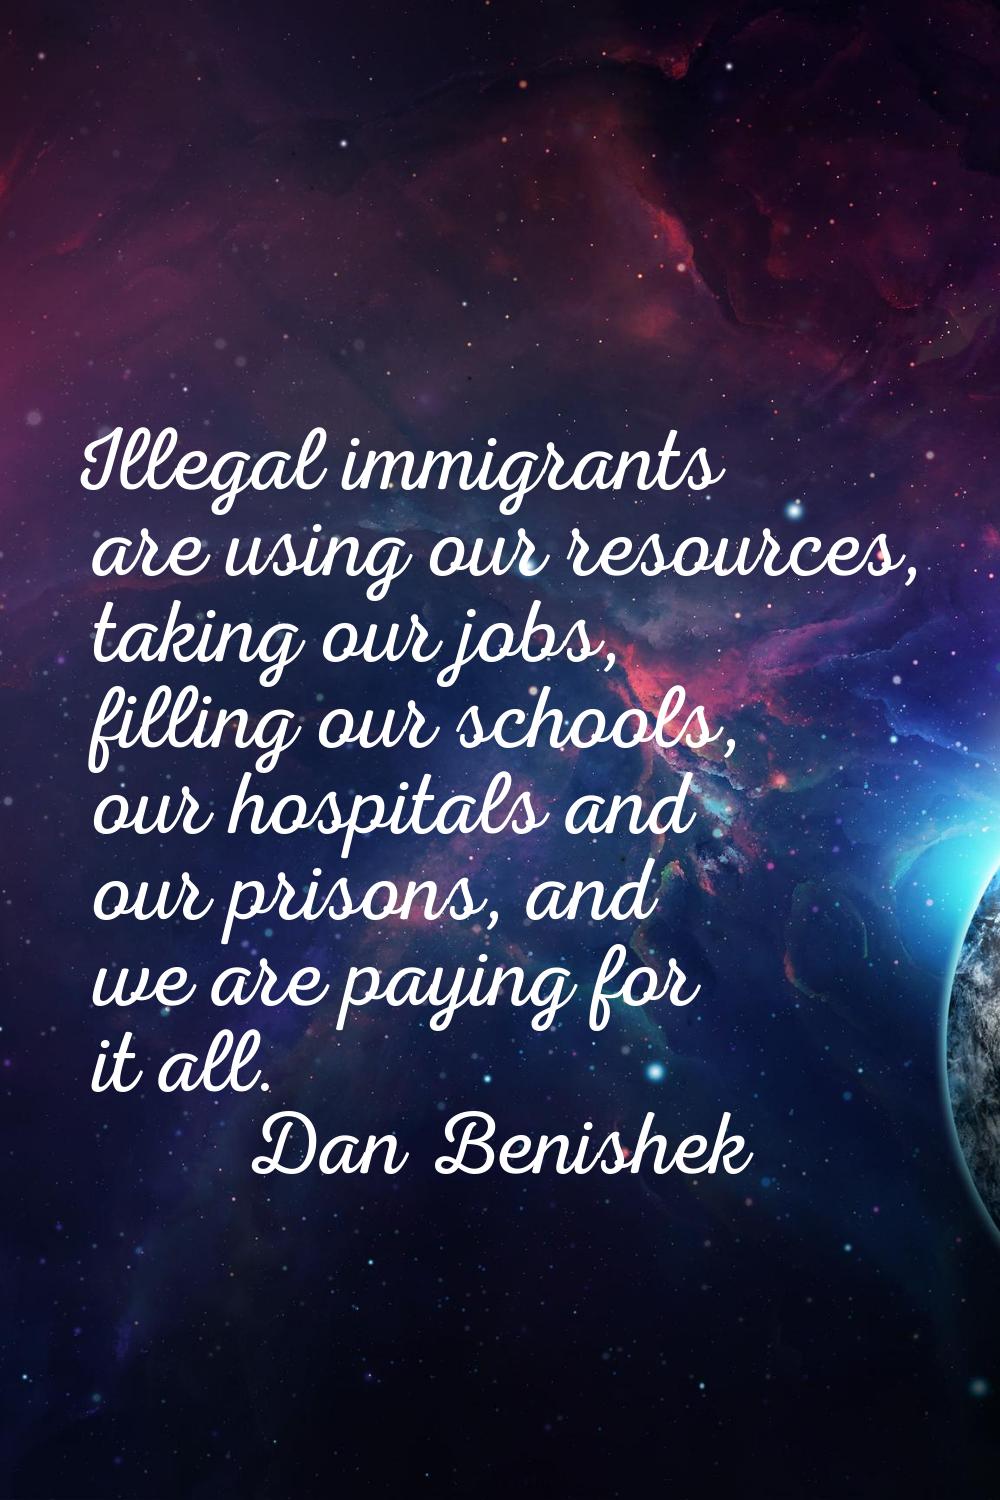 Illegal immigrants are using our resources, taking our jobs, filling our schools, our hospitals and